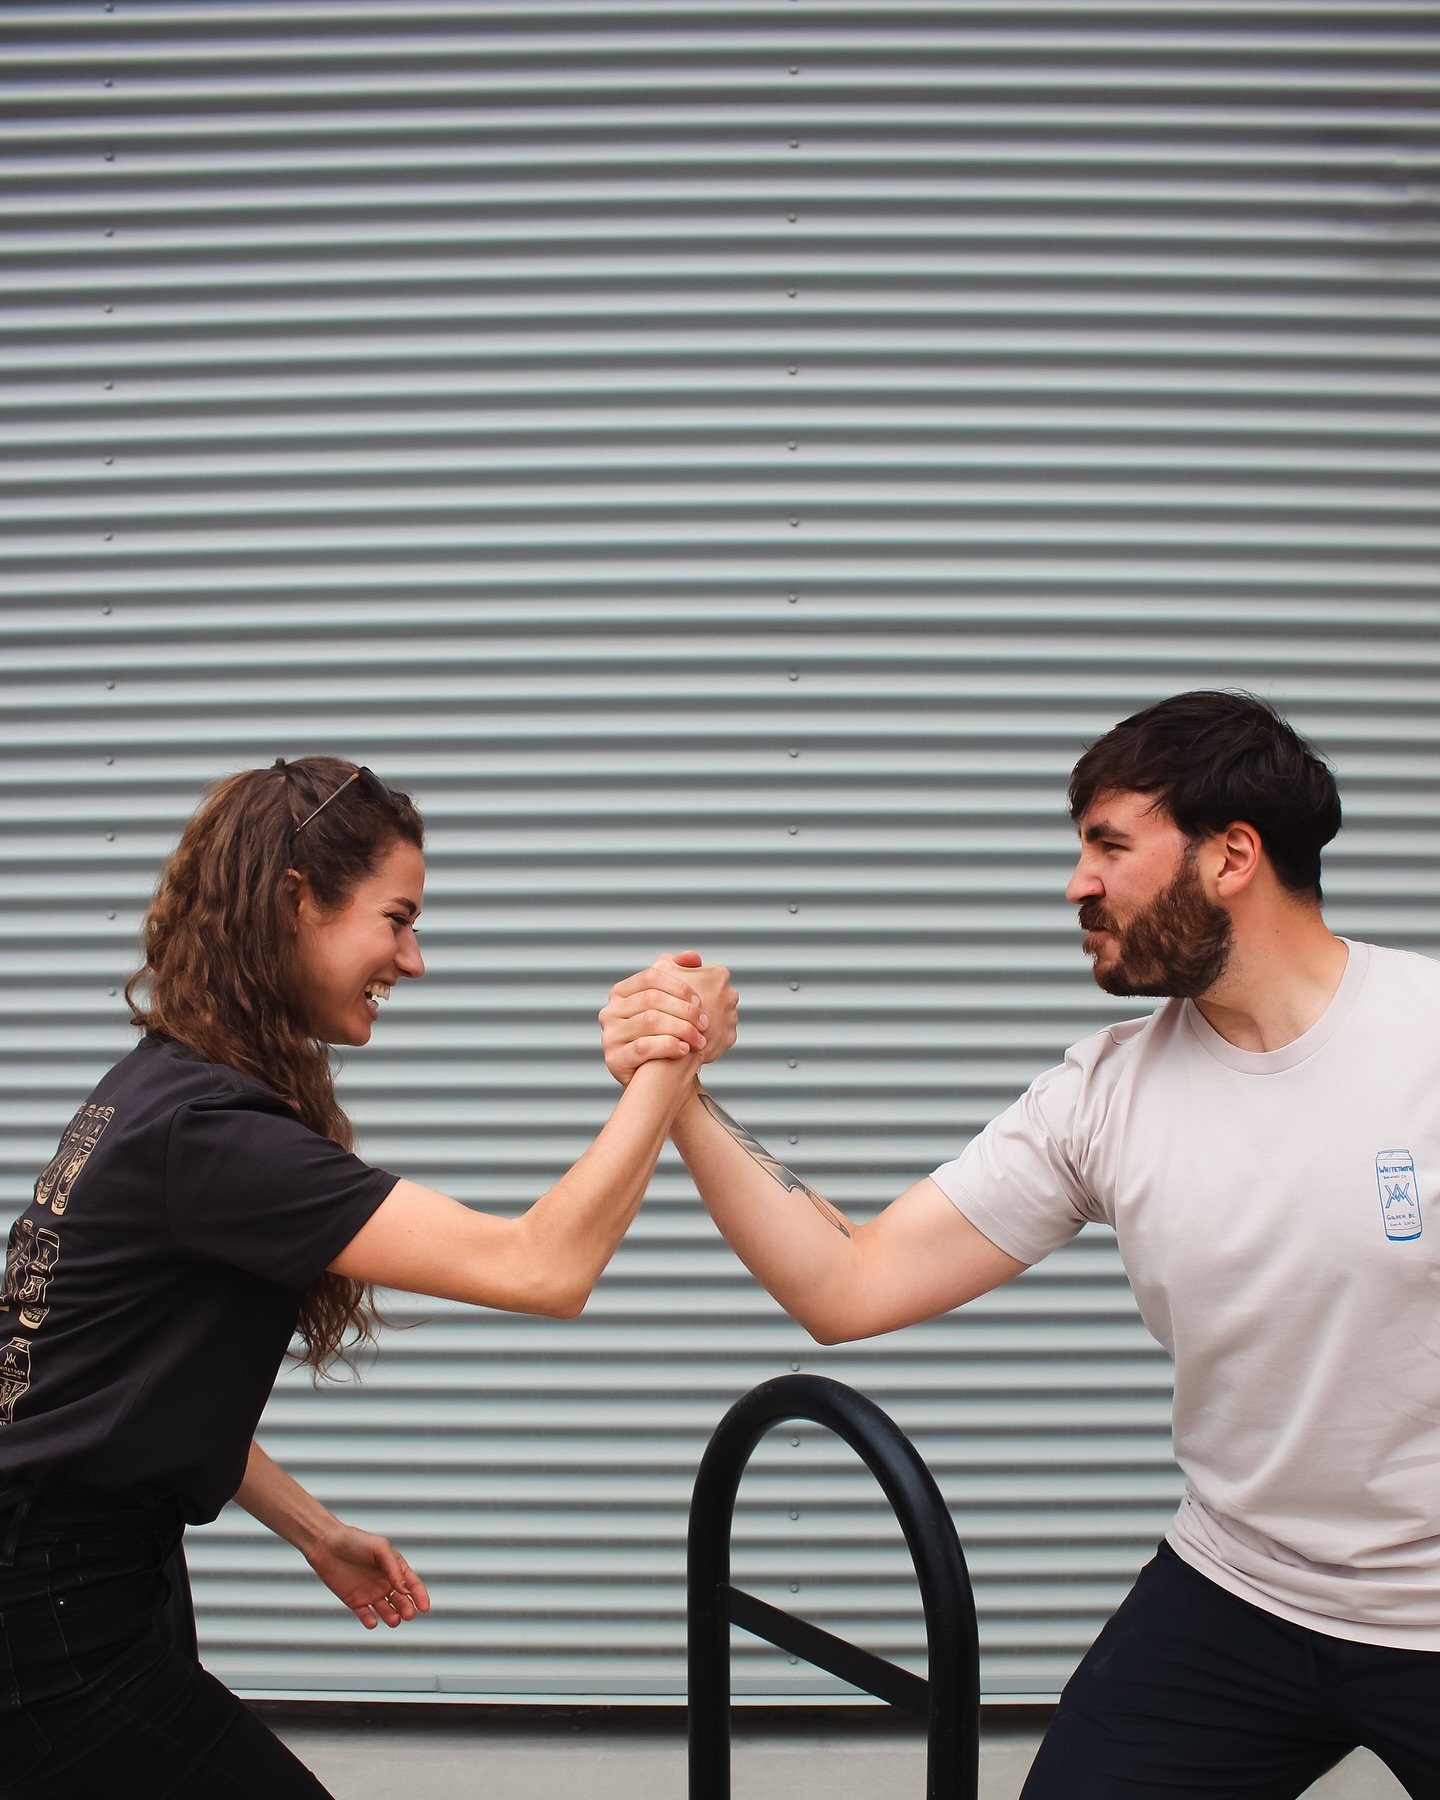 Secret &ldquo;we&rsquo;re both wearing rad new WTB swag&rdquo; handshake OR arm wrestling over which new colourway is better? 

New Tallboy Tees are in stock in two new colours: Charcoal/Tan and Bone/Cobalt Blue 🤩

Come check &lsquo;em out!
Open 12p